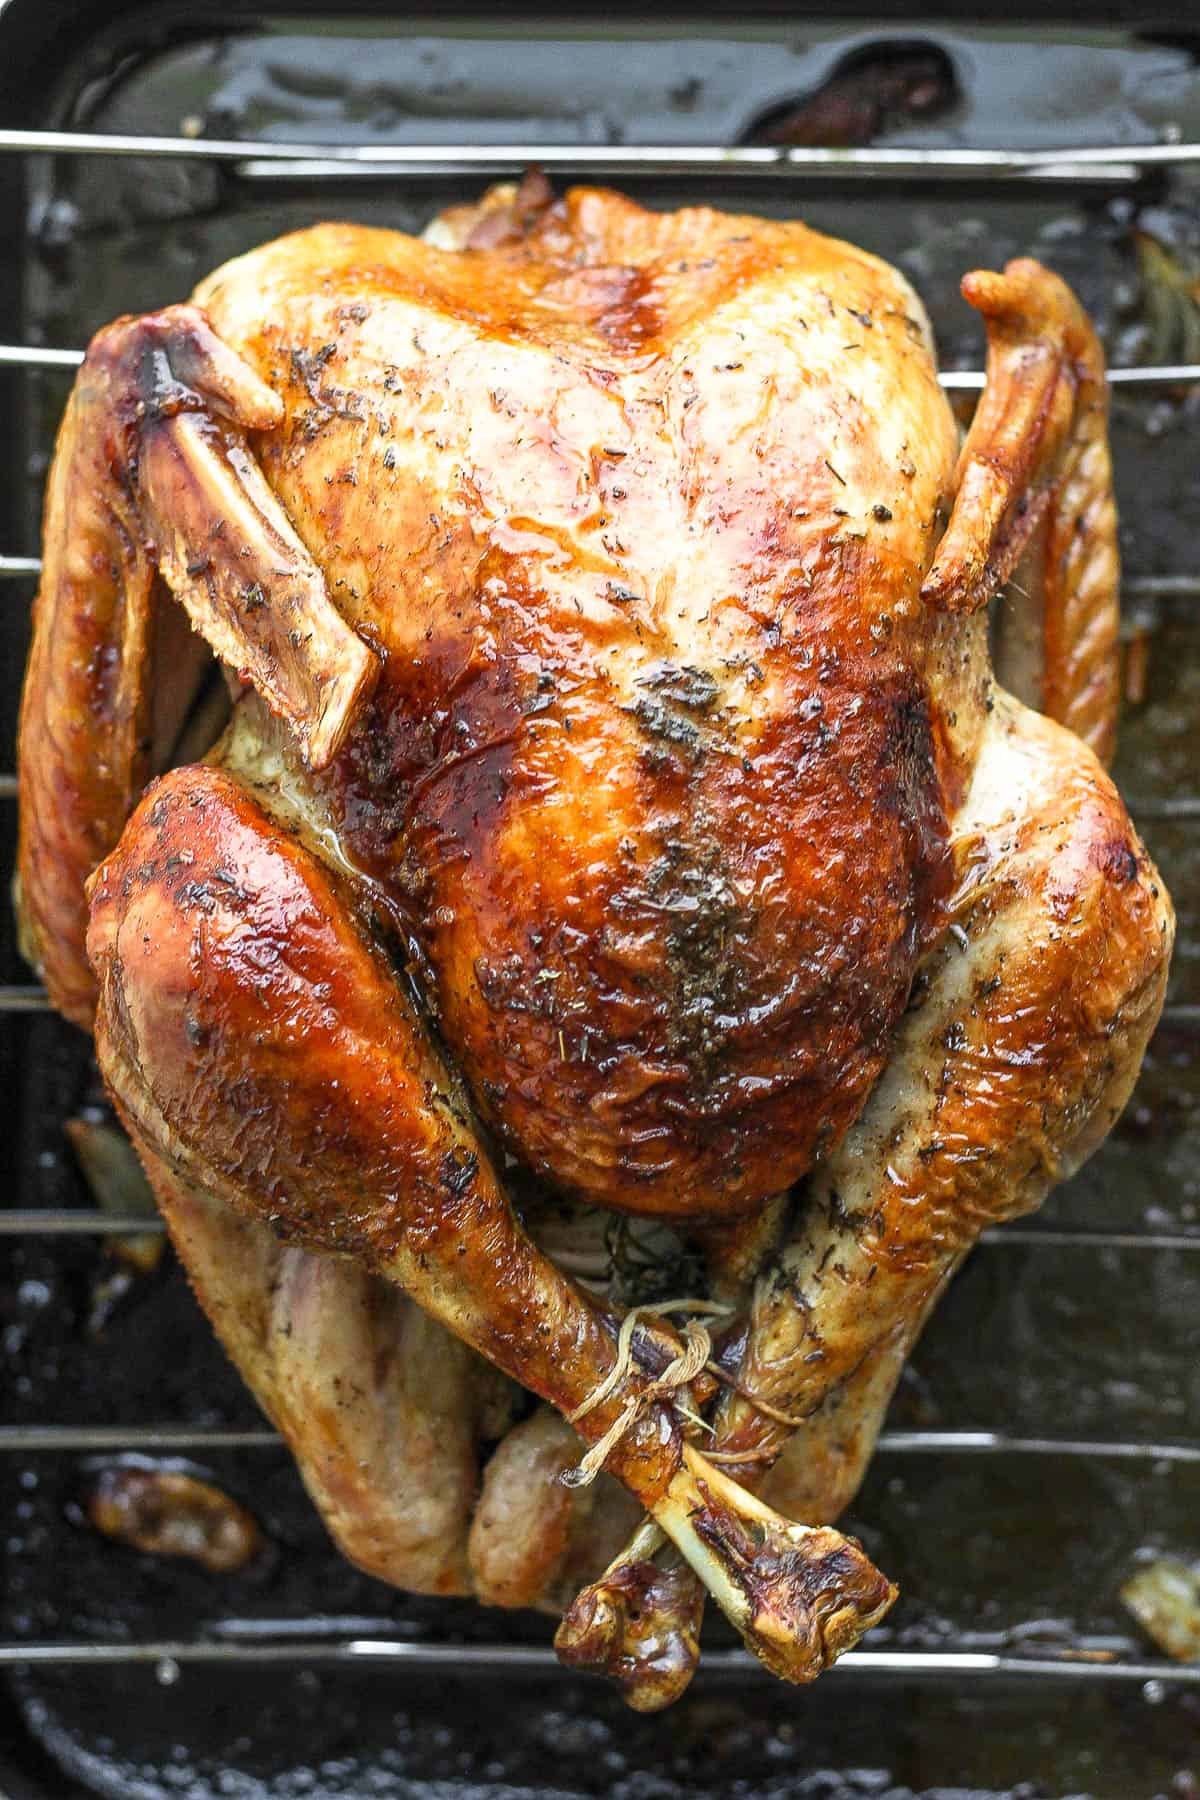 A dry brined turkey that has been roasted in the oven.